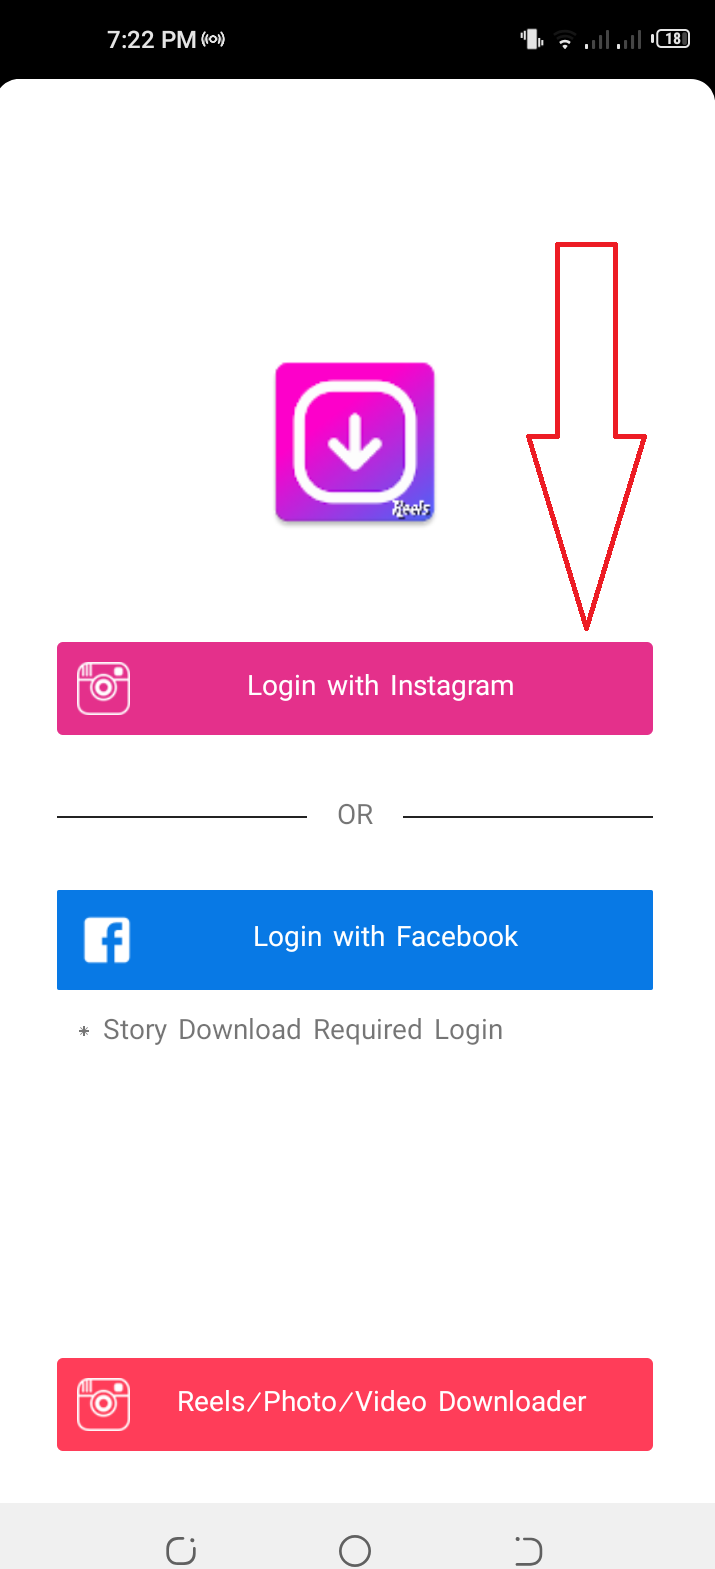 Launch the application and use your Instagram credentials to log in.